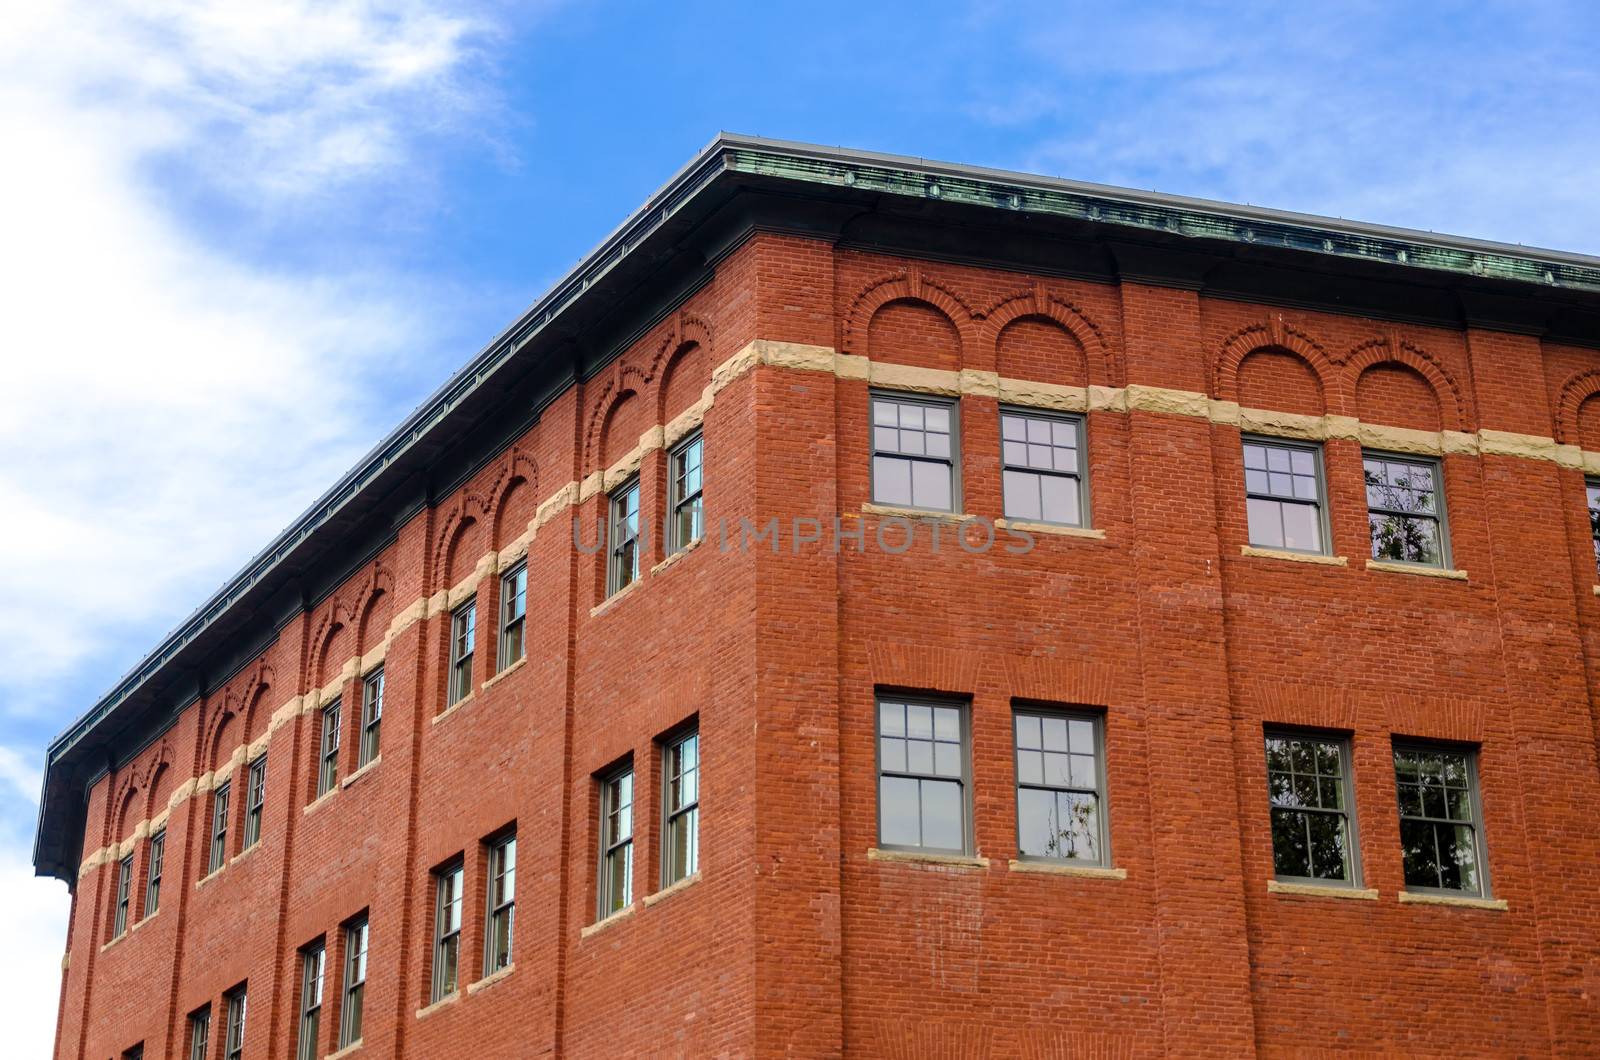 View of an old brick building in the center of Portland, Oregon